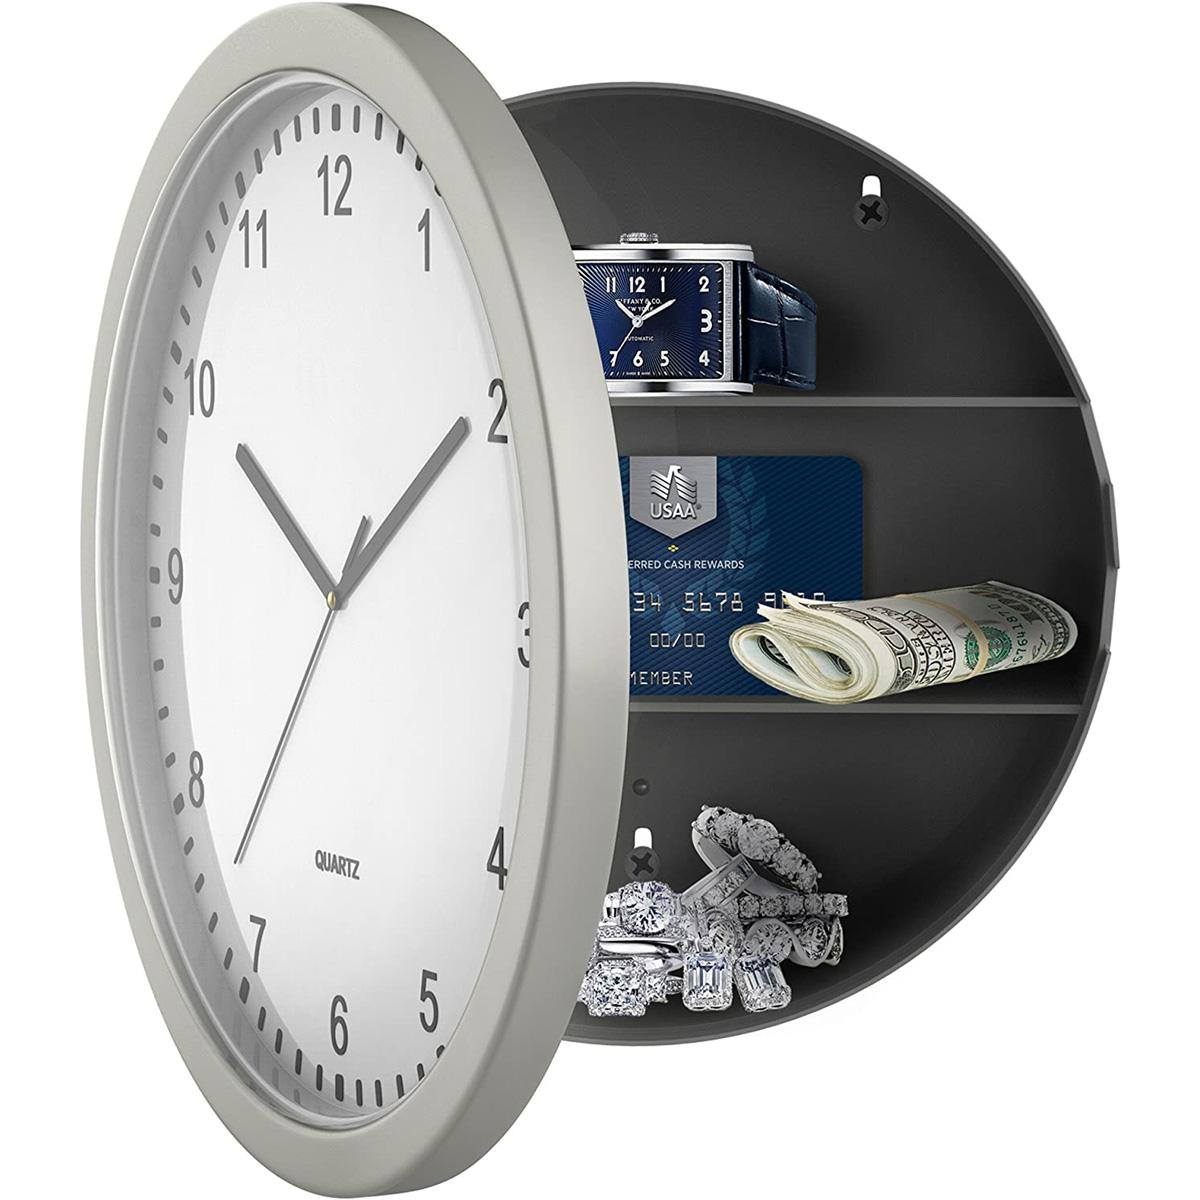 10in Trademark Home Kitchen Wall Clock Safe for $11.66